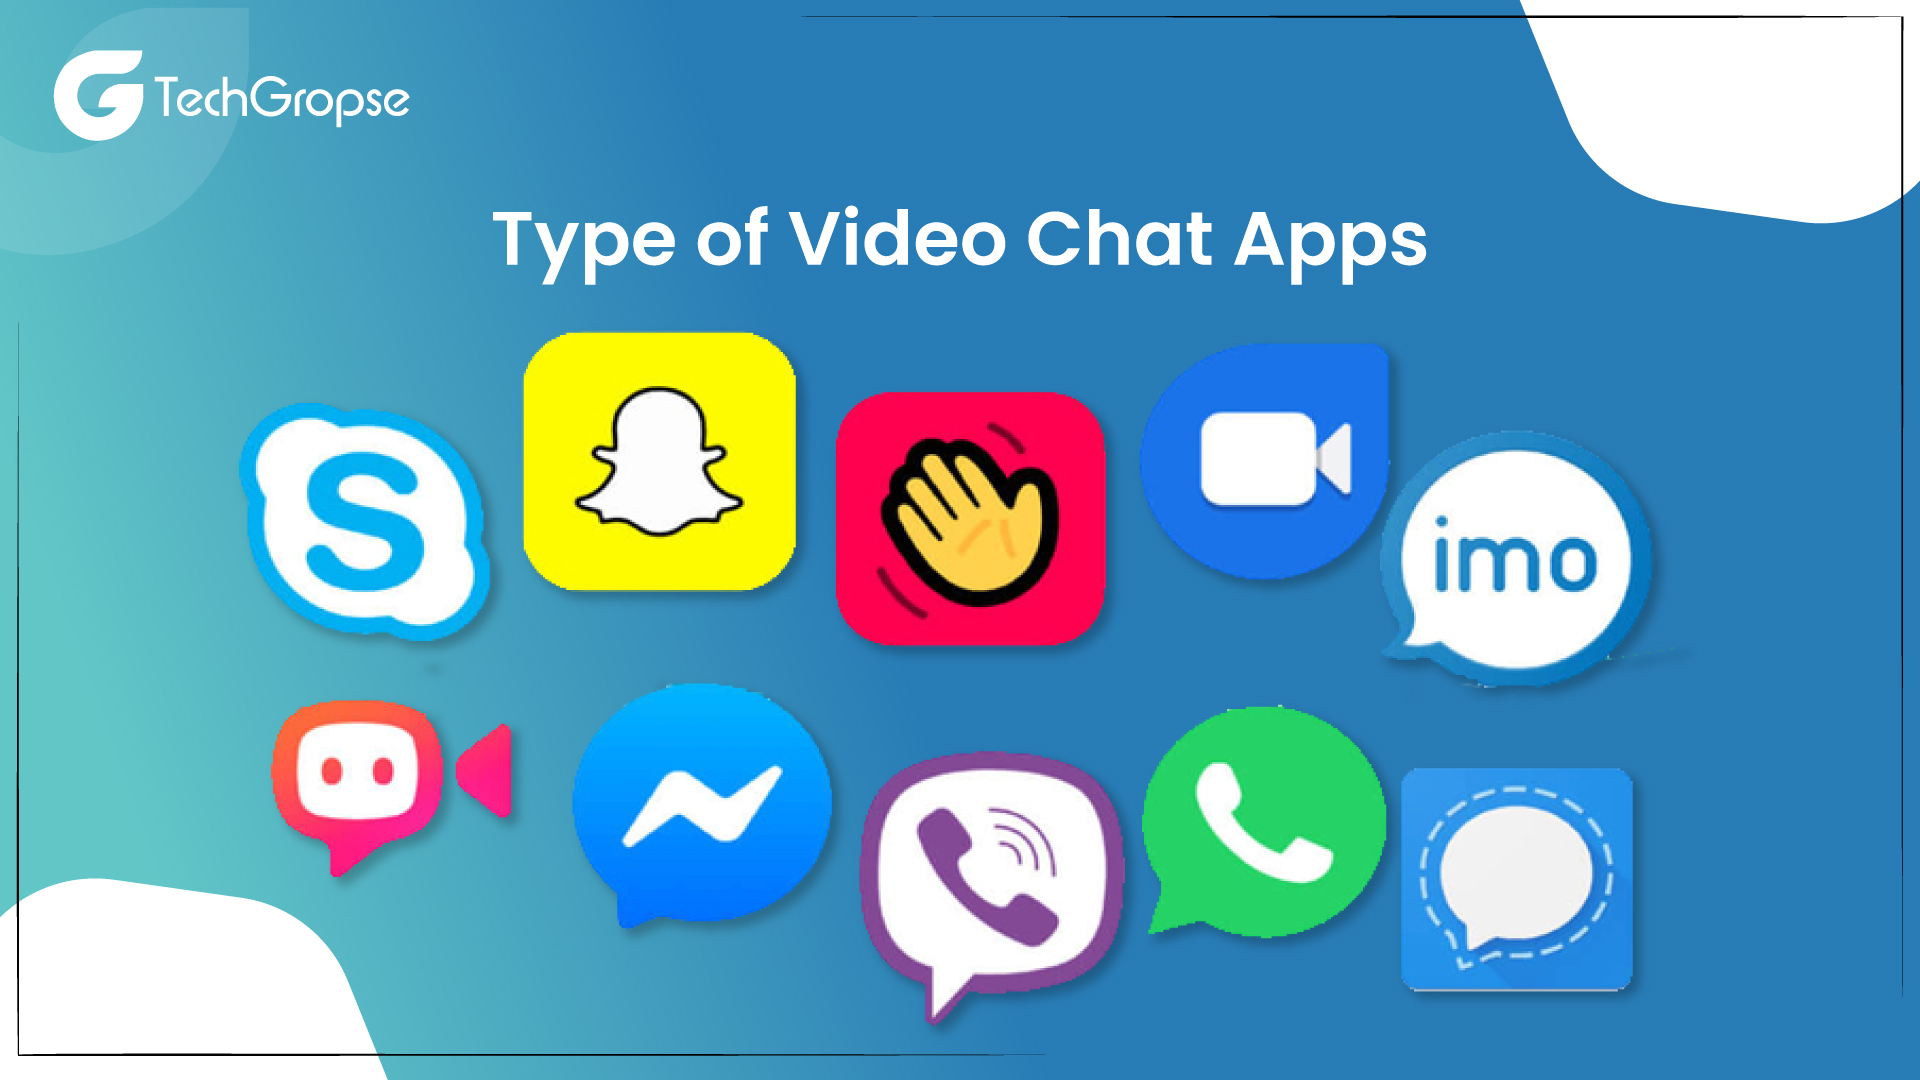 Type of Video Chat Apps